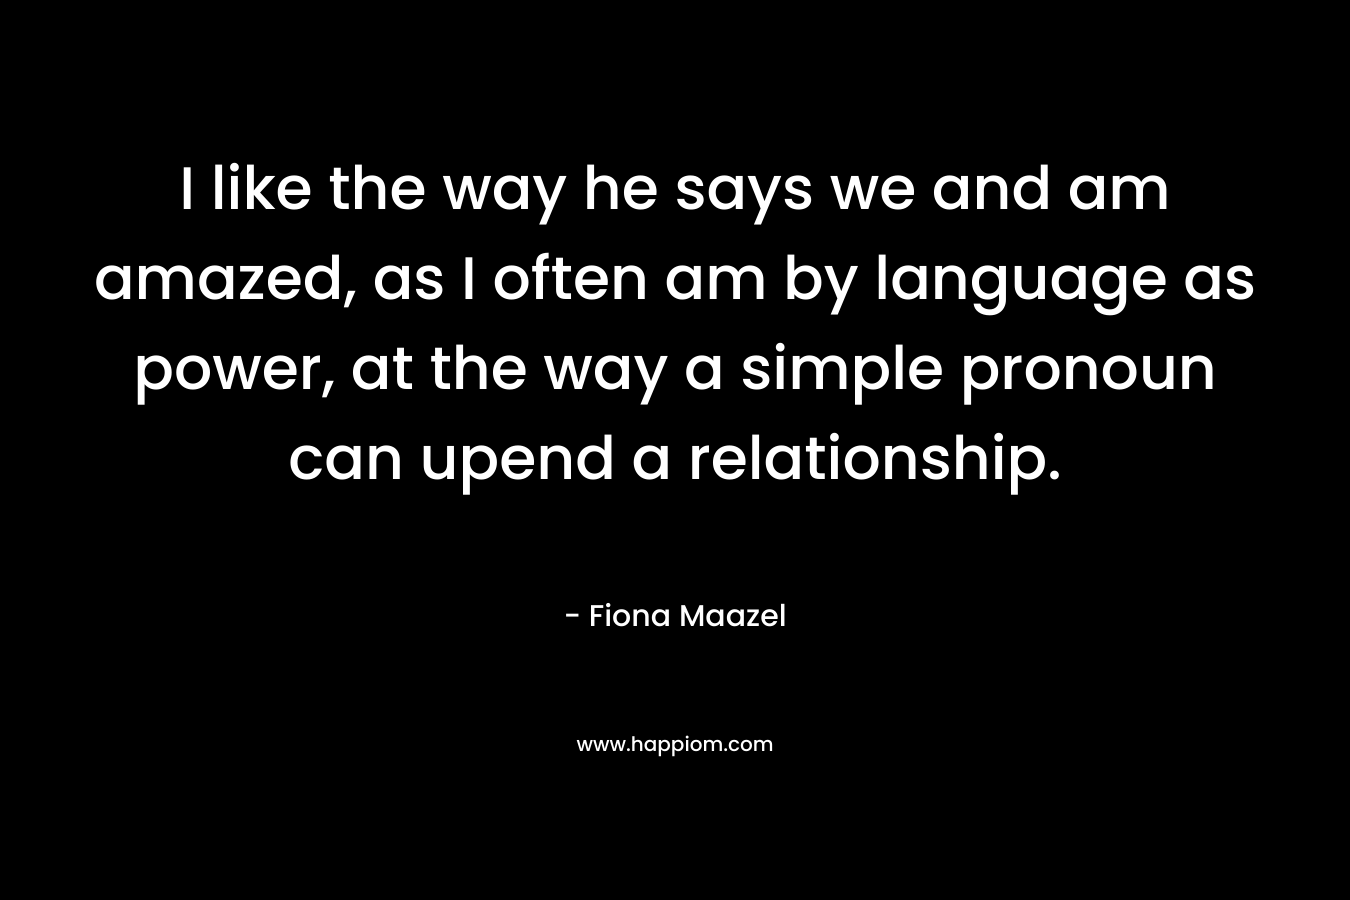 I like the way he says we and am amazed, as I often am by language as power, at the way a simple pronoun can upend a relationship.